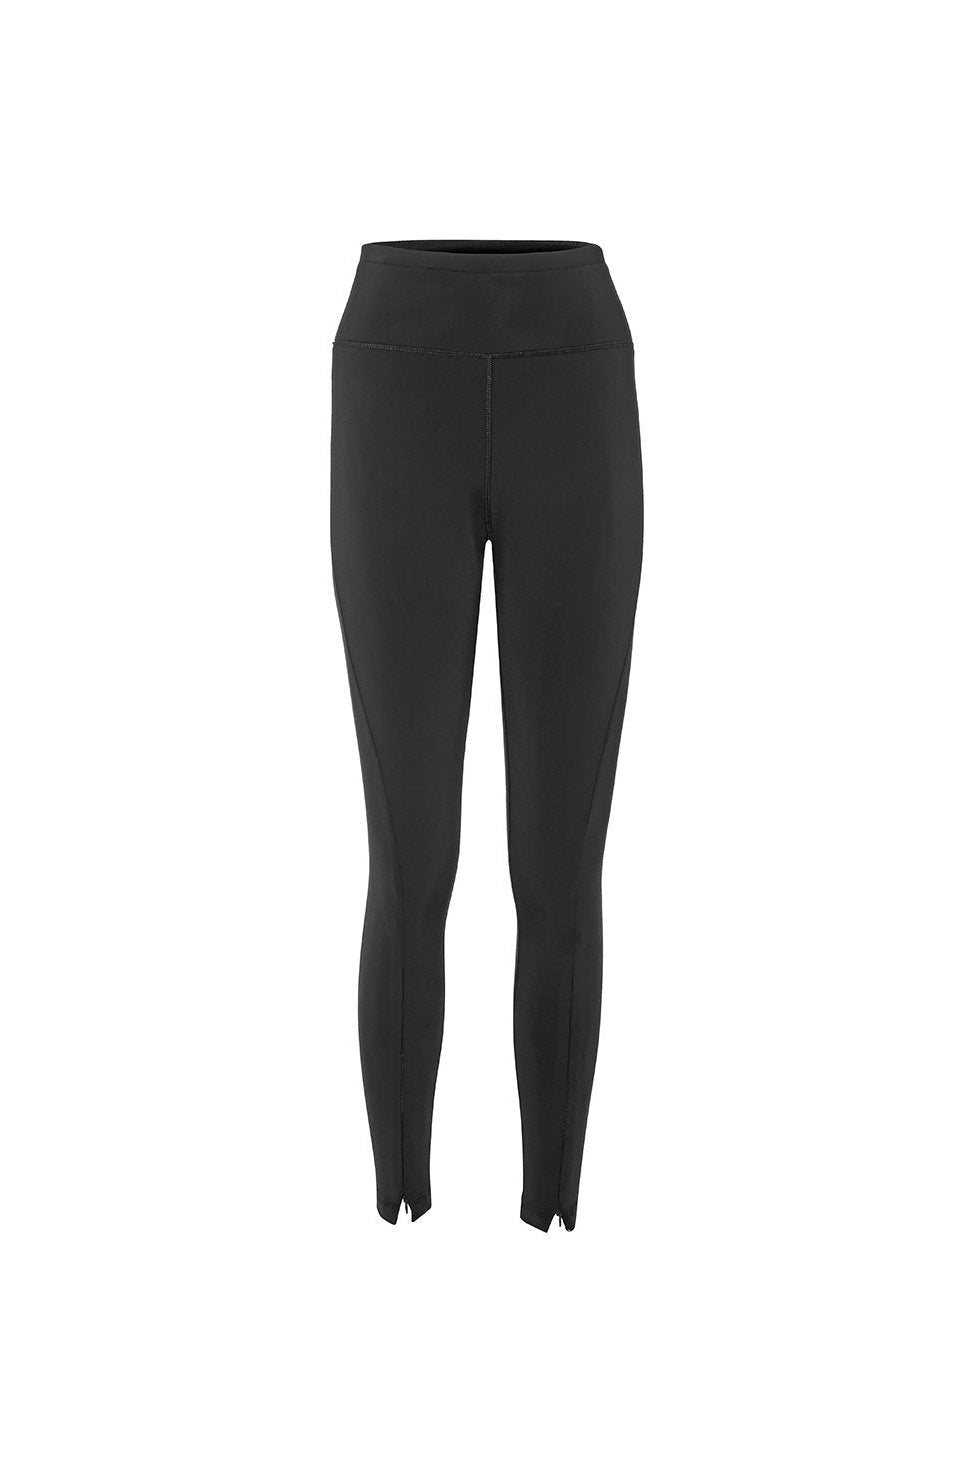 Asmuss Twisted Leggings with front zip in sustainable 4 way stretch fabric.  The best for hiking or running 